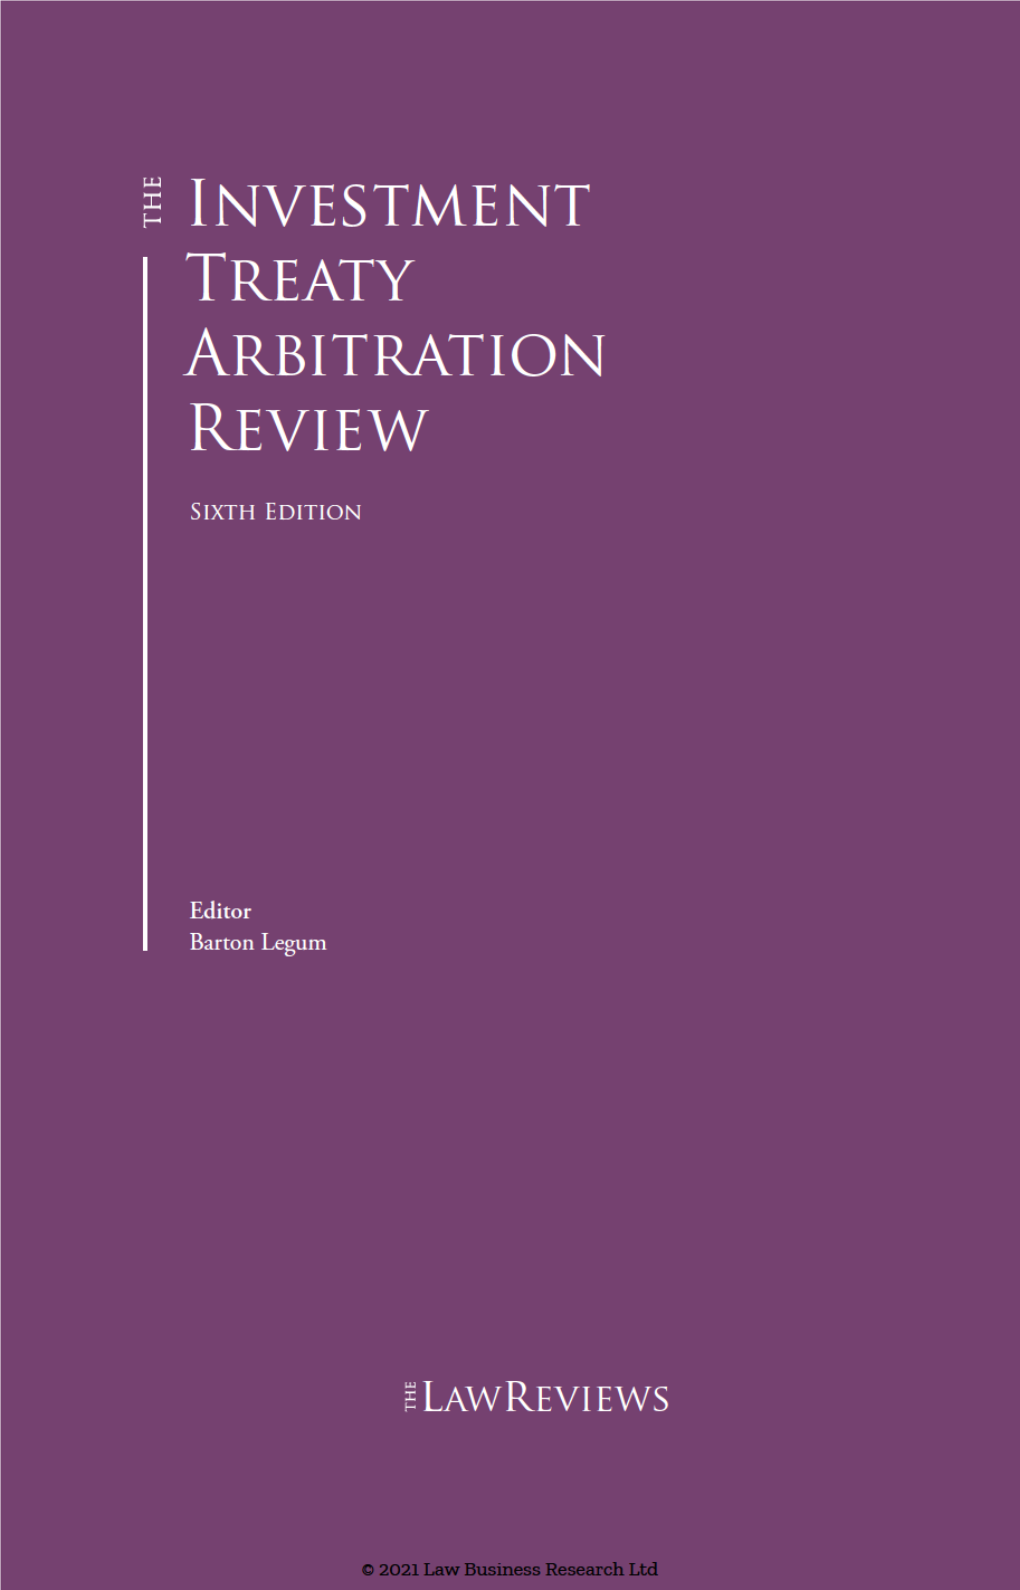 Investment Treaty Arbitration Review